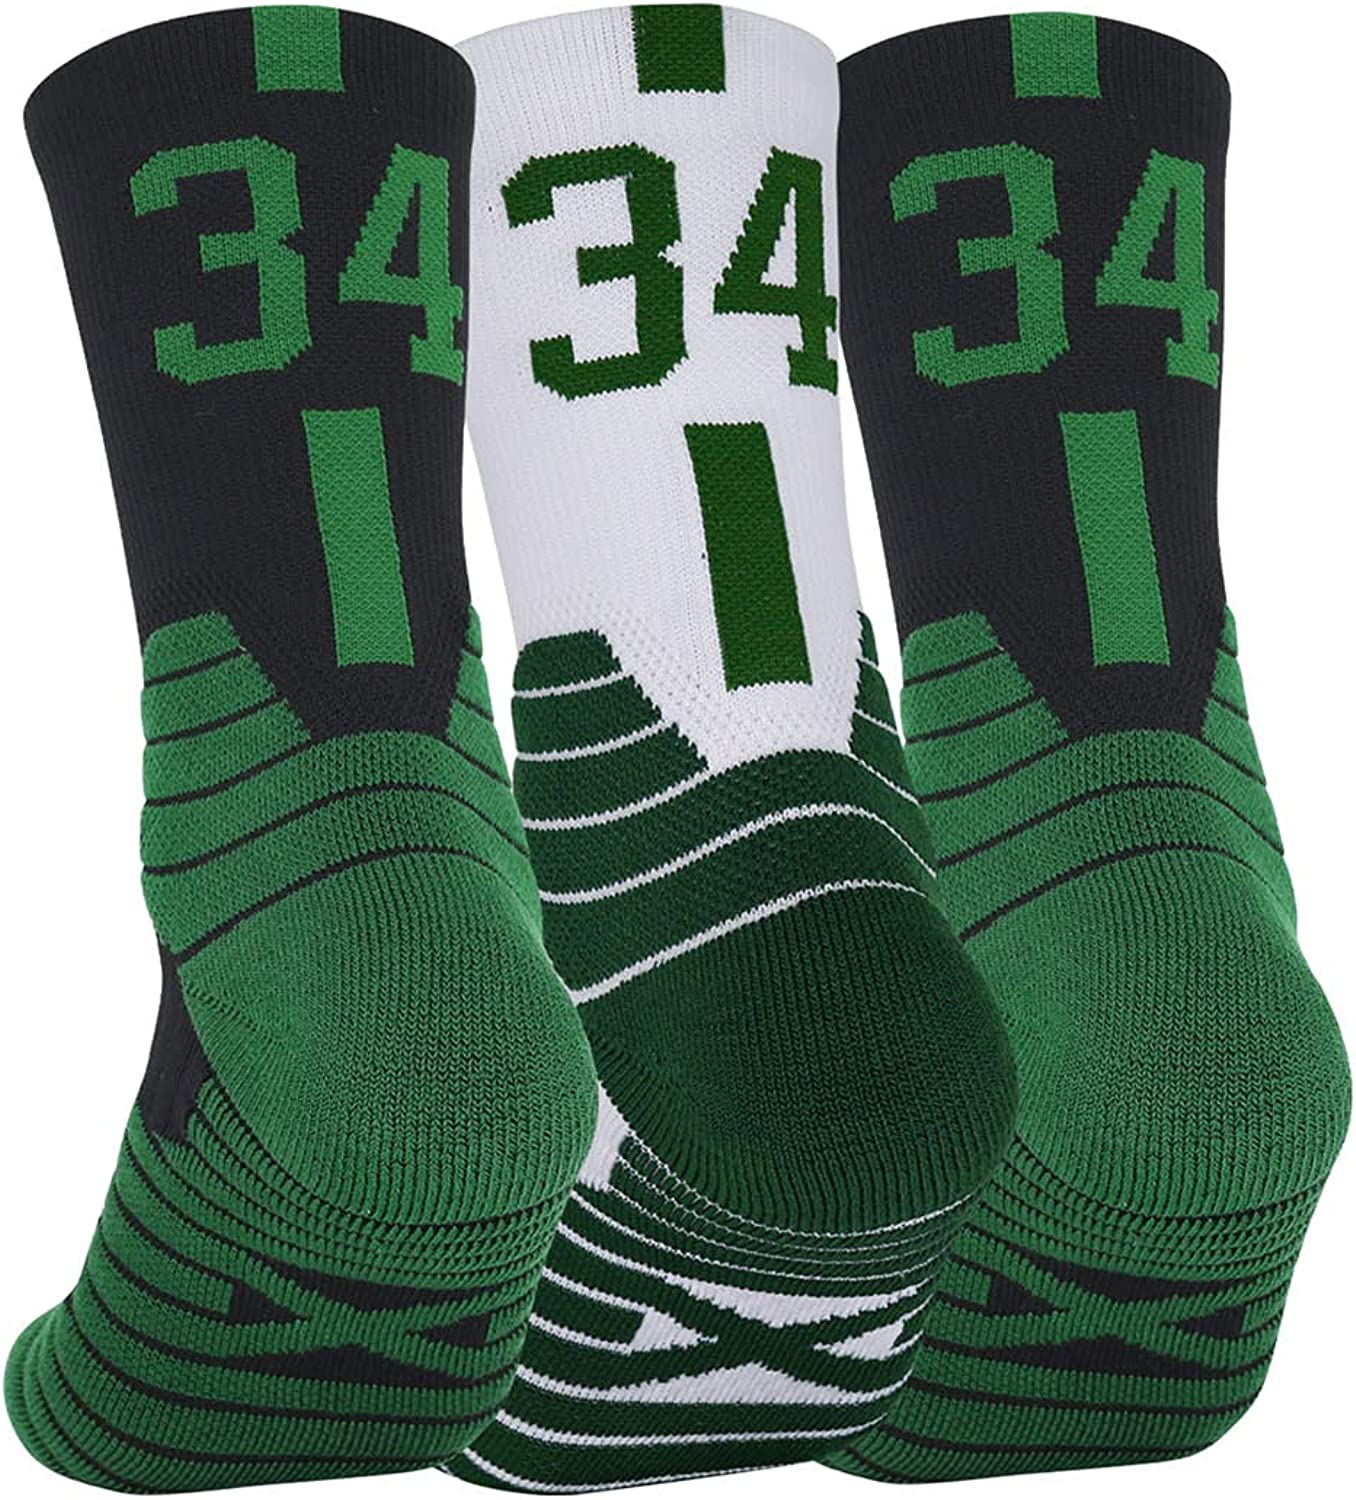 Pimaja Basketball Socks 3 Pairs, Athletic Socks with 3D Ankle Protection , Compression Cushion Sport Socks for Men &